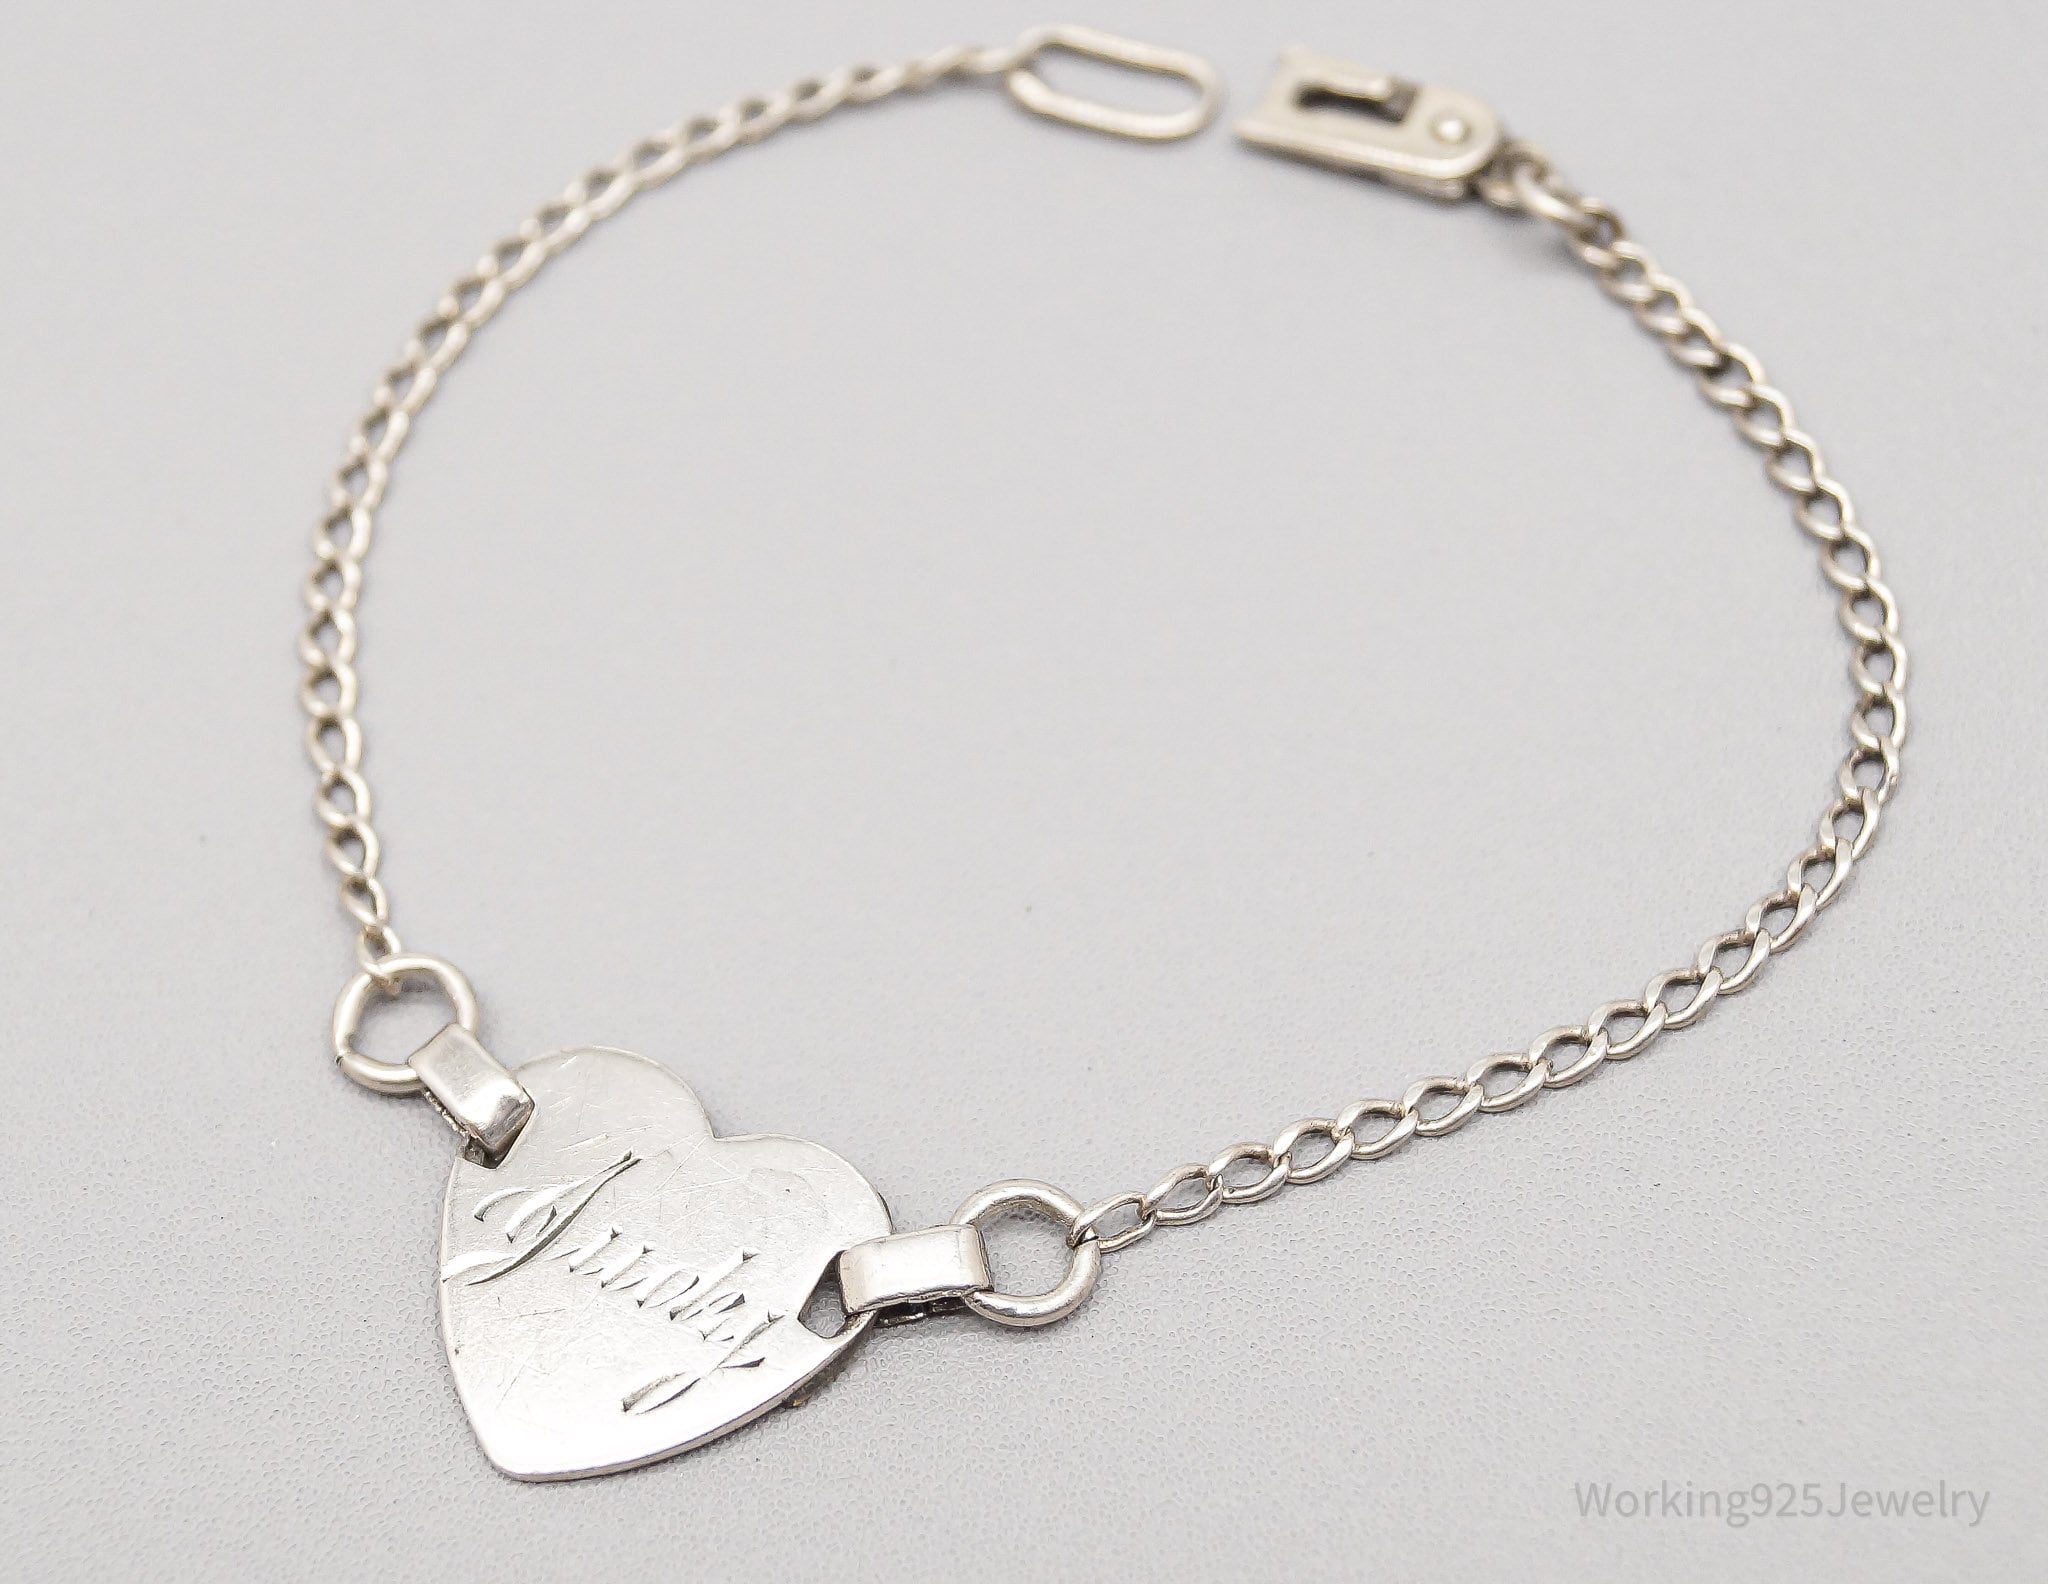 Antique "Judy" Name Etched Heart Silver Chain Bracelet - 6.5"